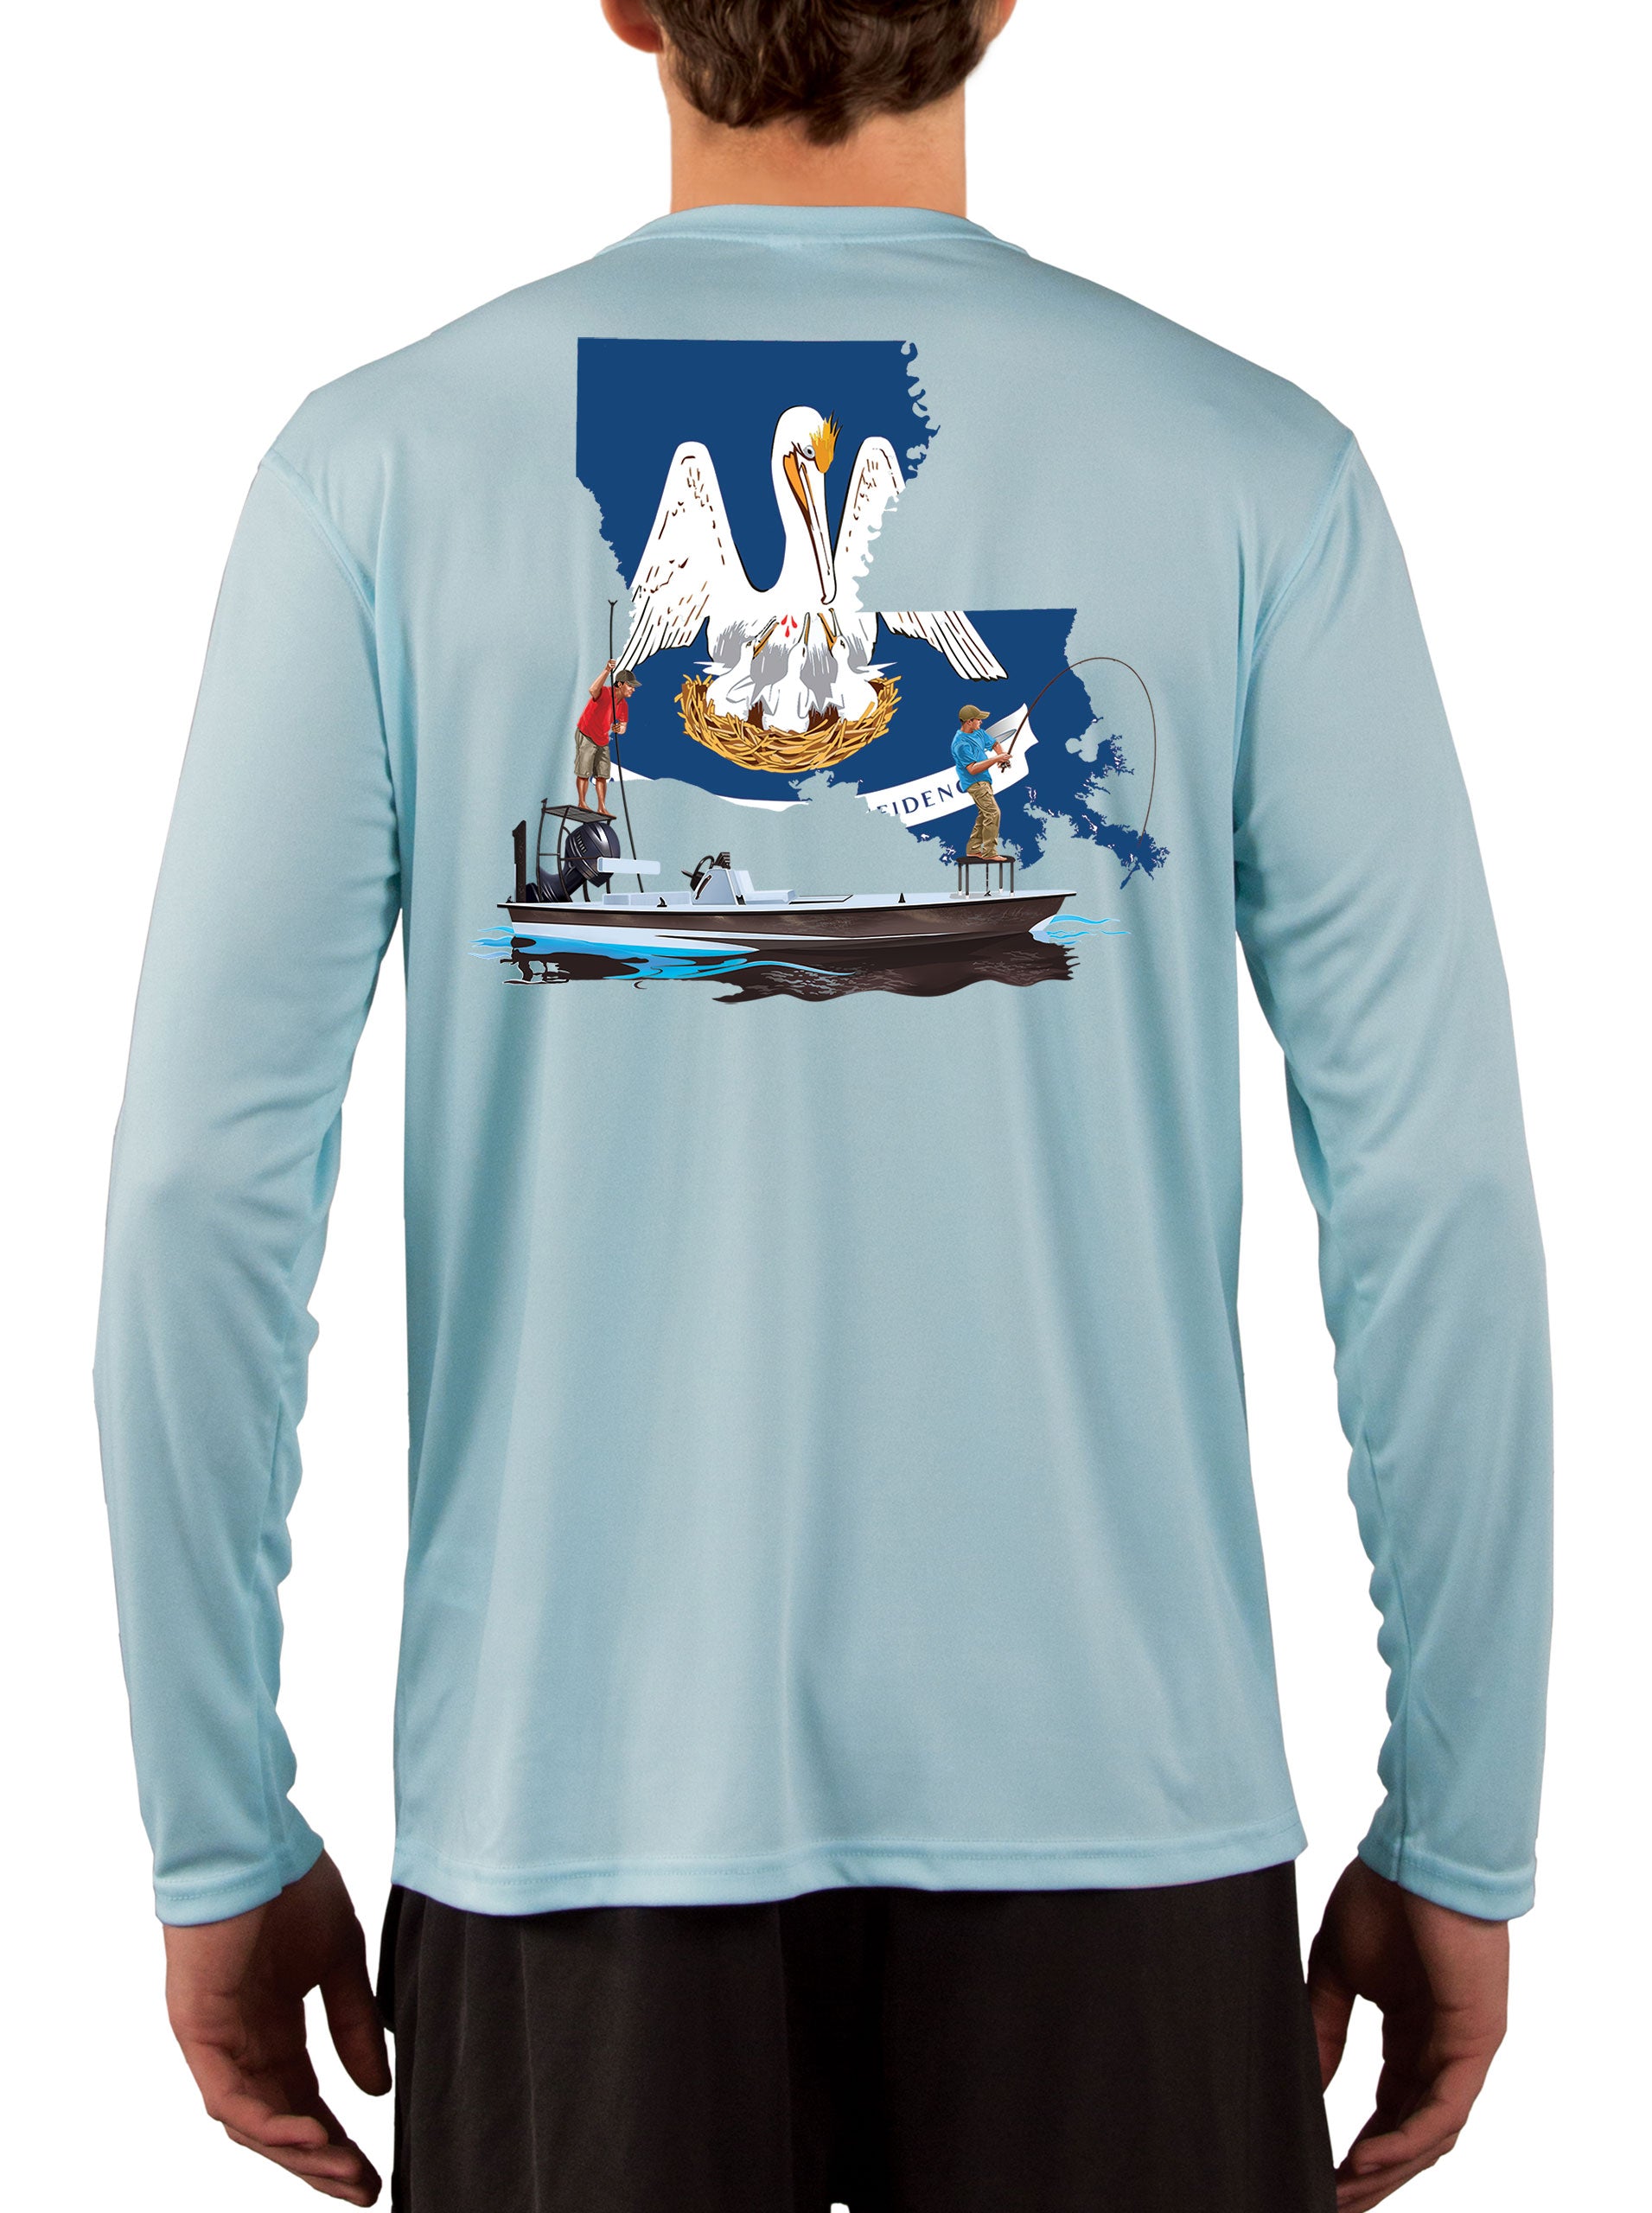 Poling Skiff with Louisiana State Flag Fishing Shirts For Men – Skiff Life